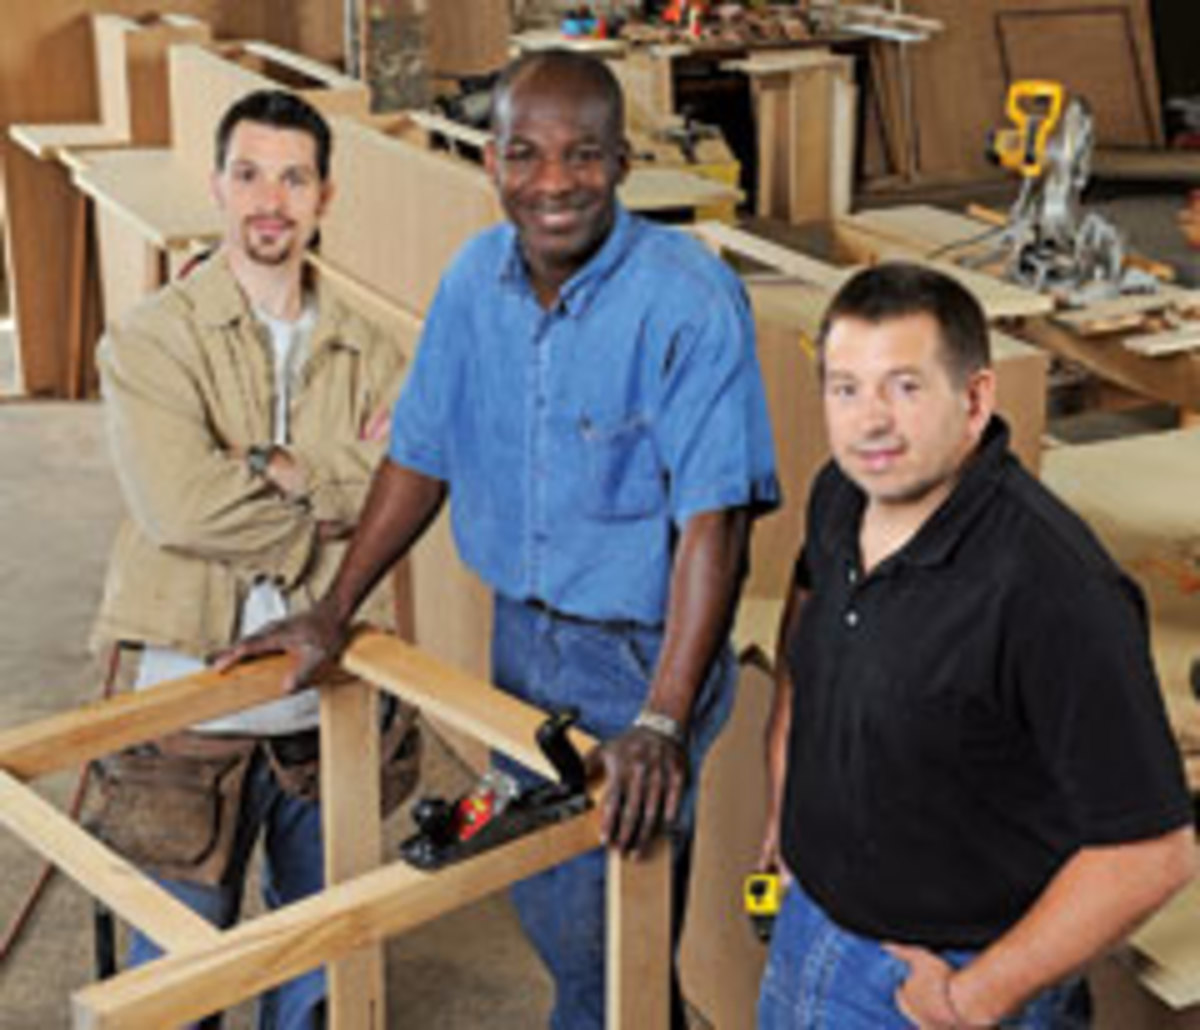 For Thomas Johnson, center, the dream of opening a woodworking school has been realized.